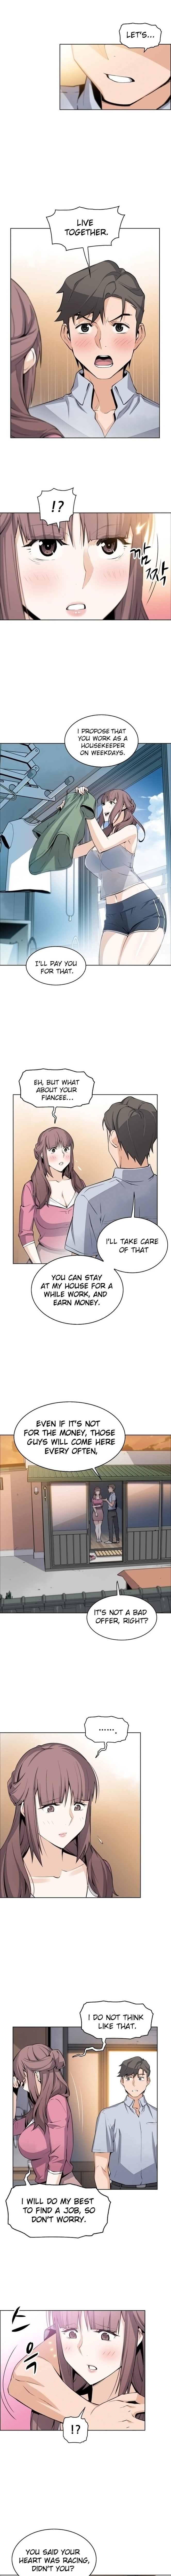 Housekeeper Manhwa - Chapter 23 Page 7